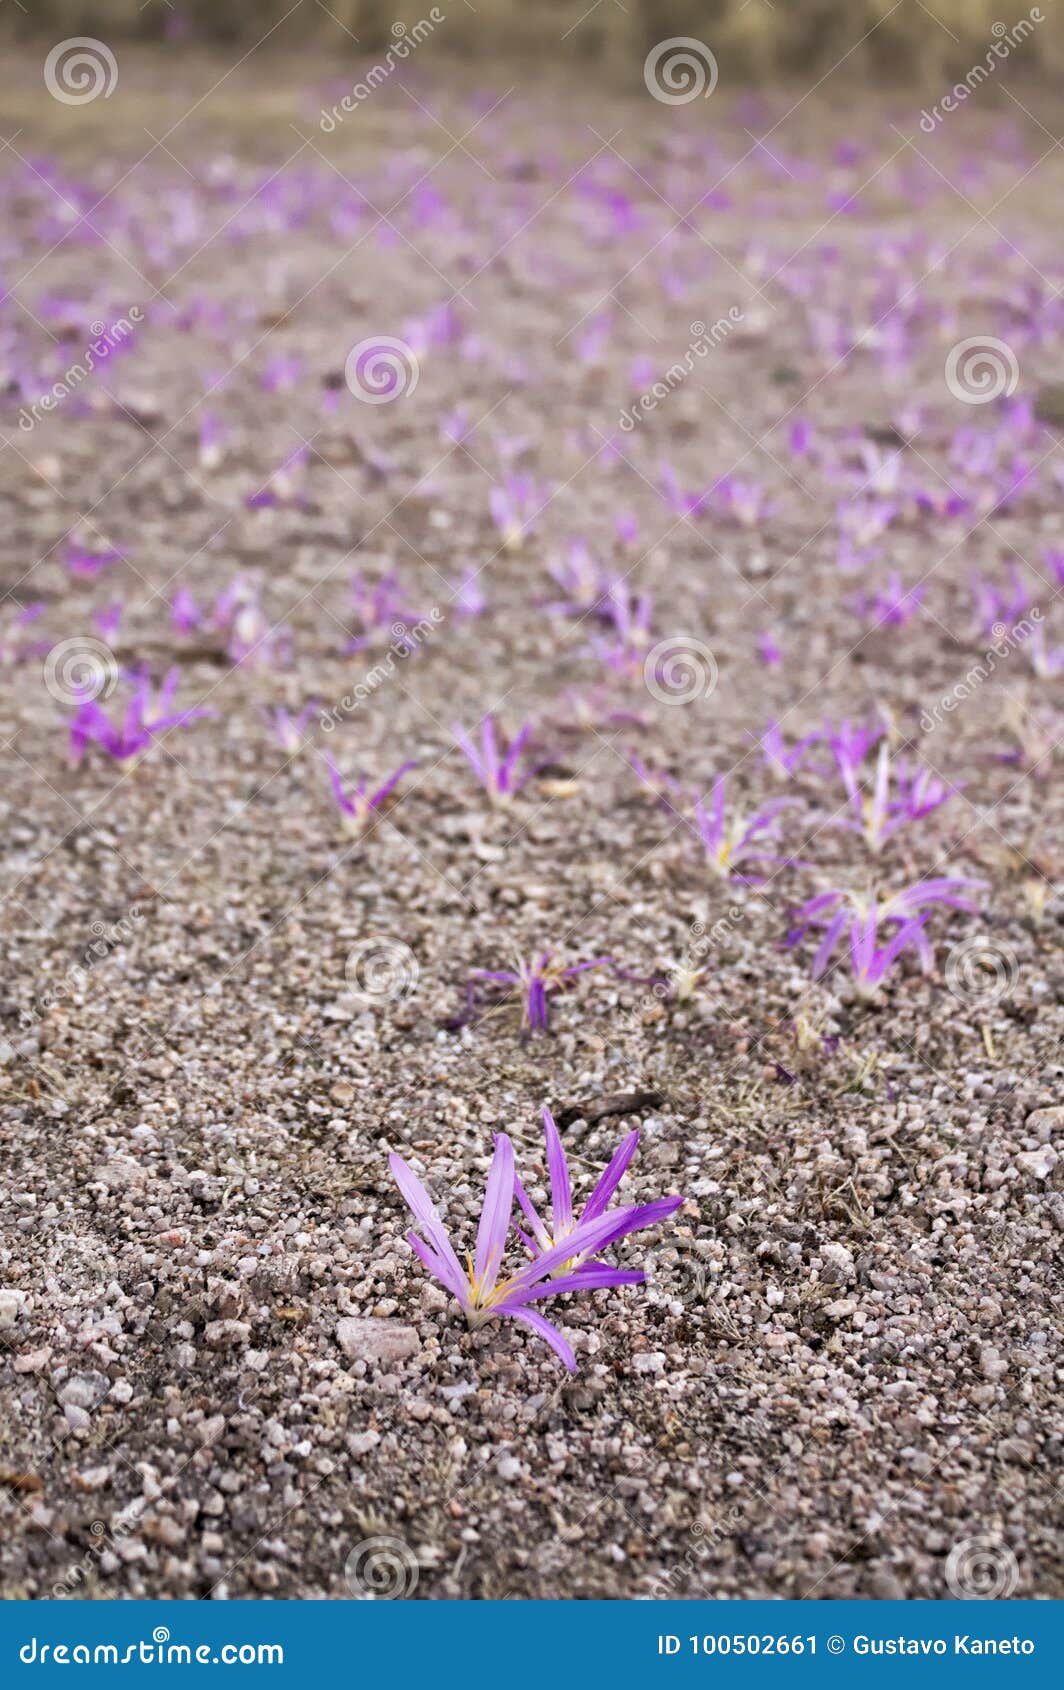 pink flowers blooming from the ground